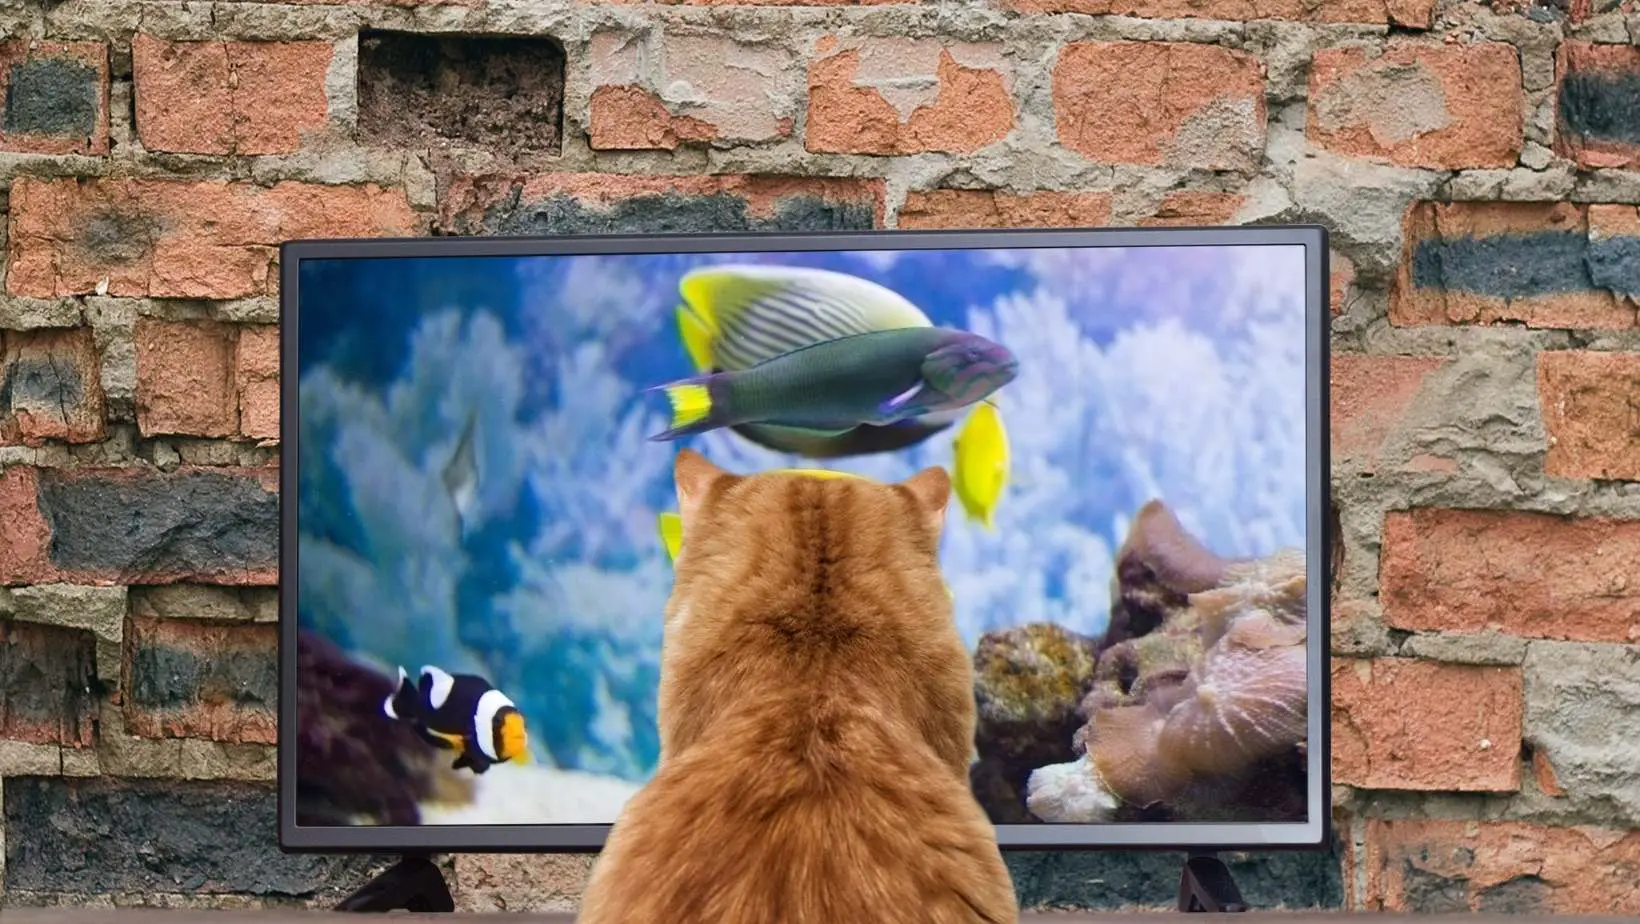 How to Stop Cat From Jumping on Tv?